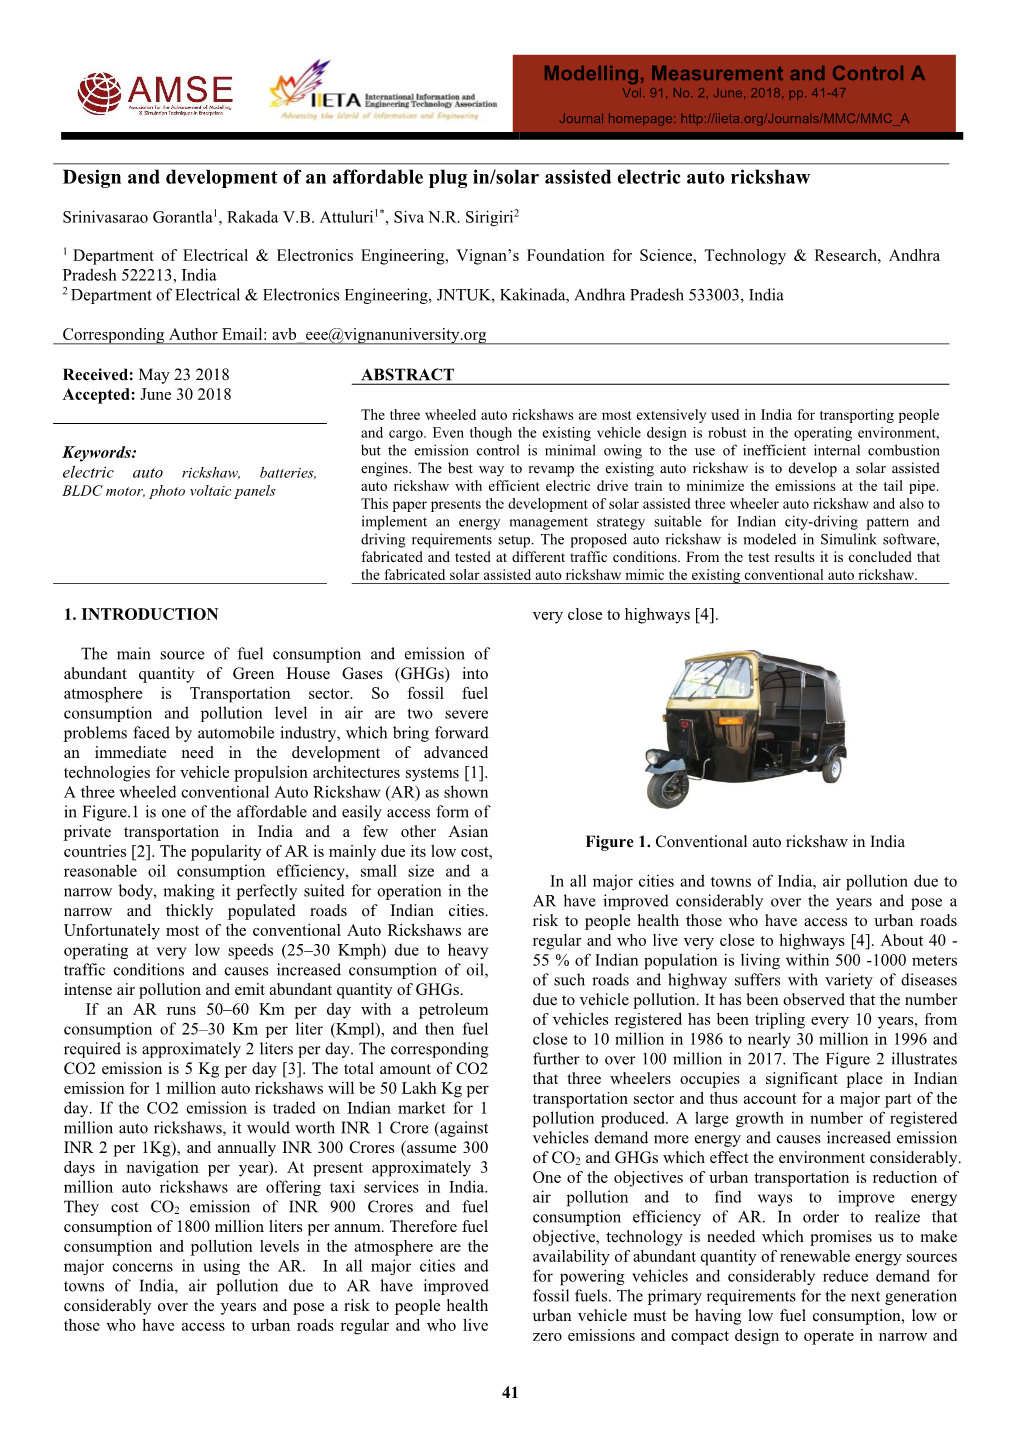 Design and Development of an Affordable Plug In/Solar Assisted Electric Auto Rickshaw